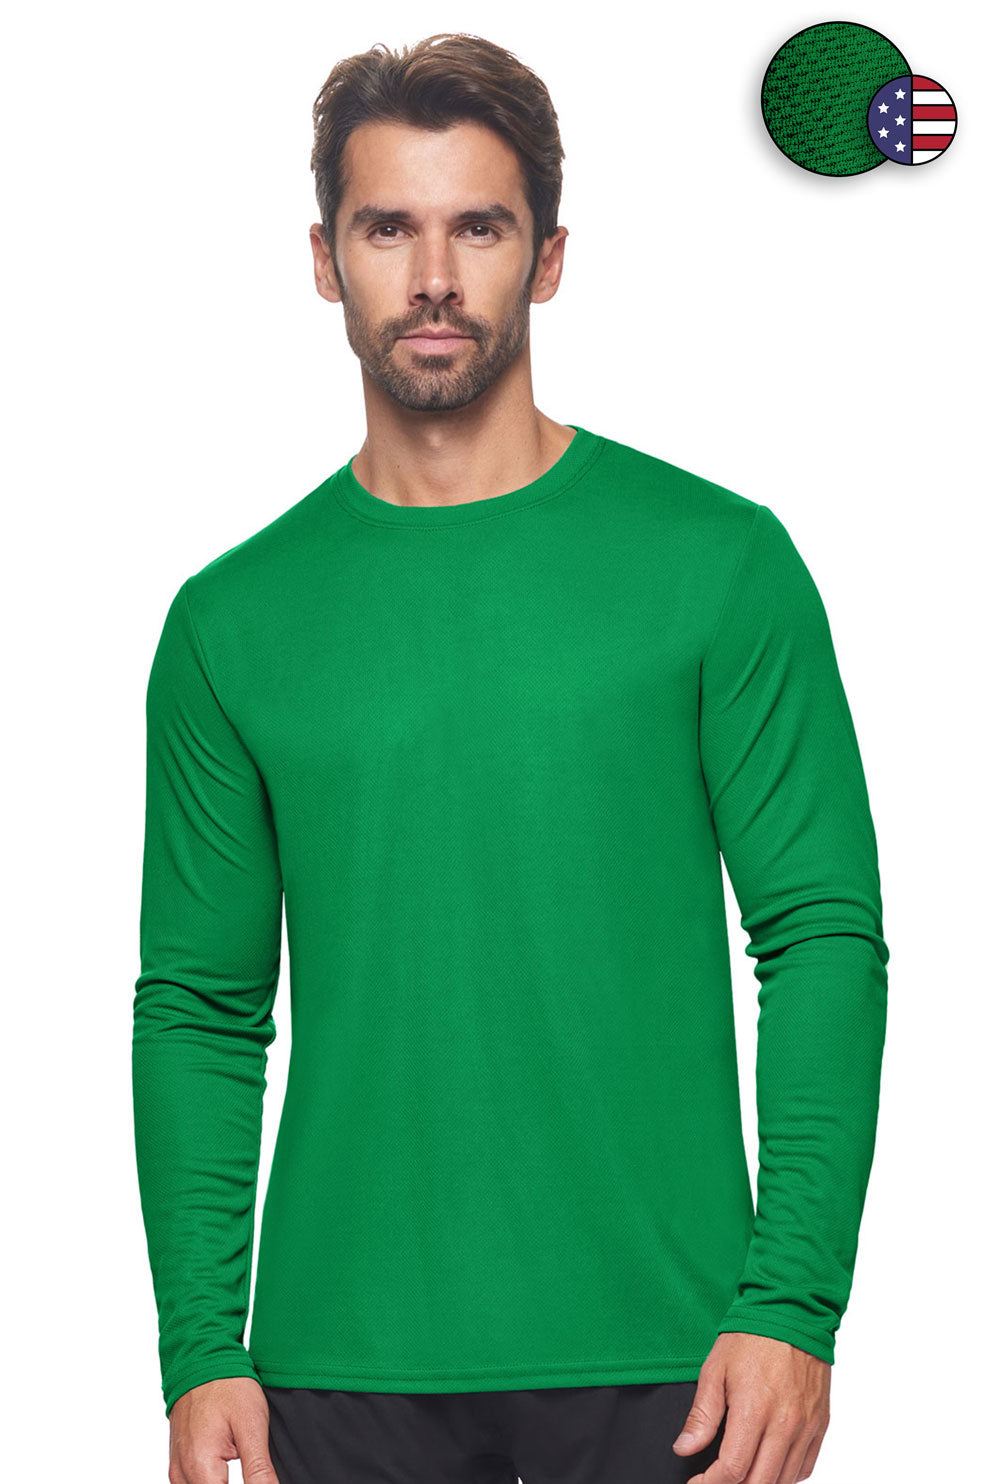 Expert Brand Wholesale Men's Oxymesh Performance Long Sleeve Tec Tee Made in USA AJ901D Kelly Green#kelly-green